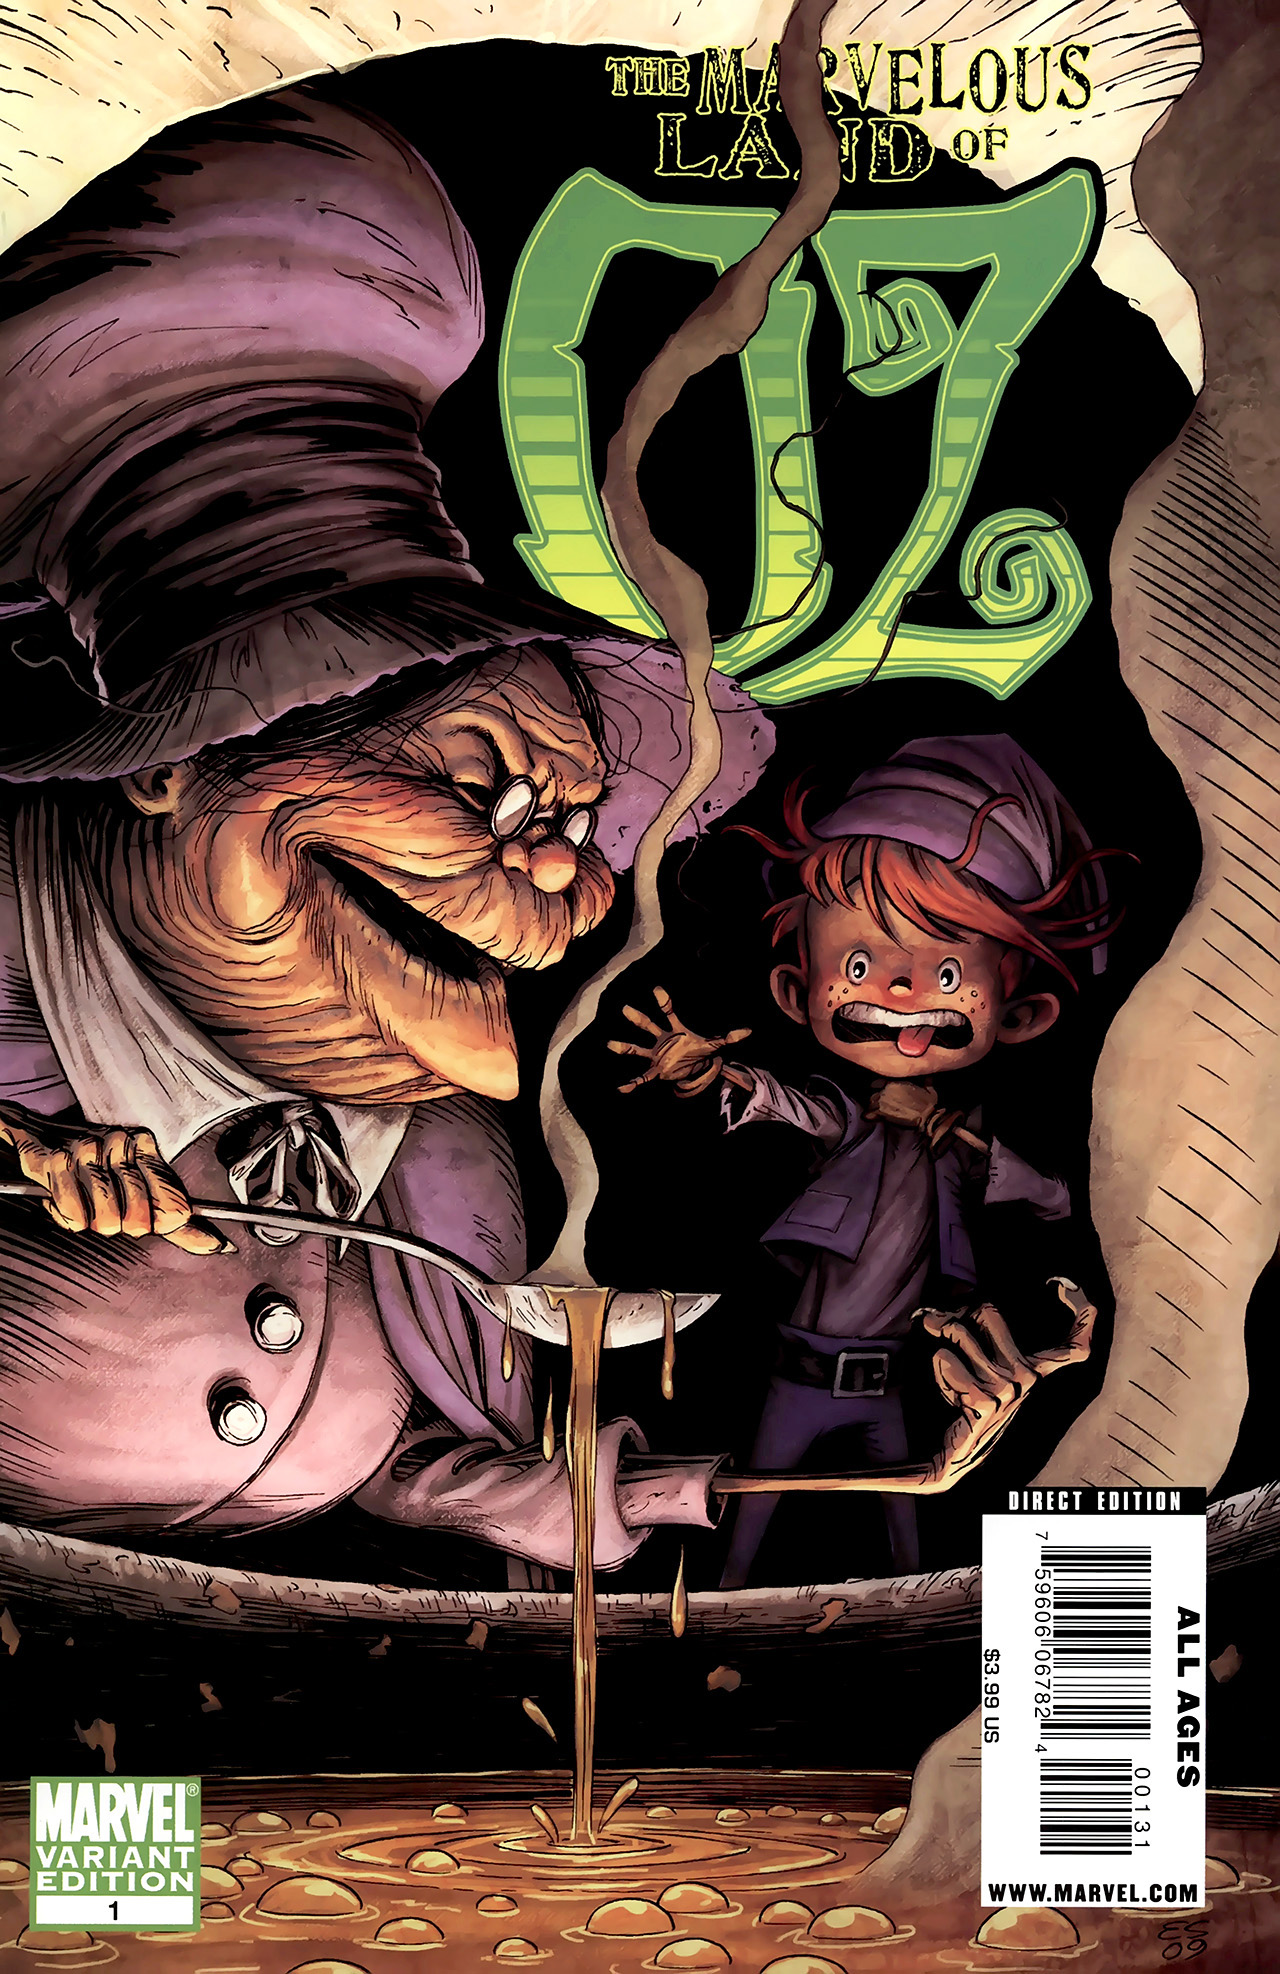 Read online The Marvelous Land of Oz comic -  Issue #1 - 3